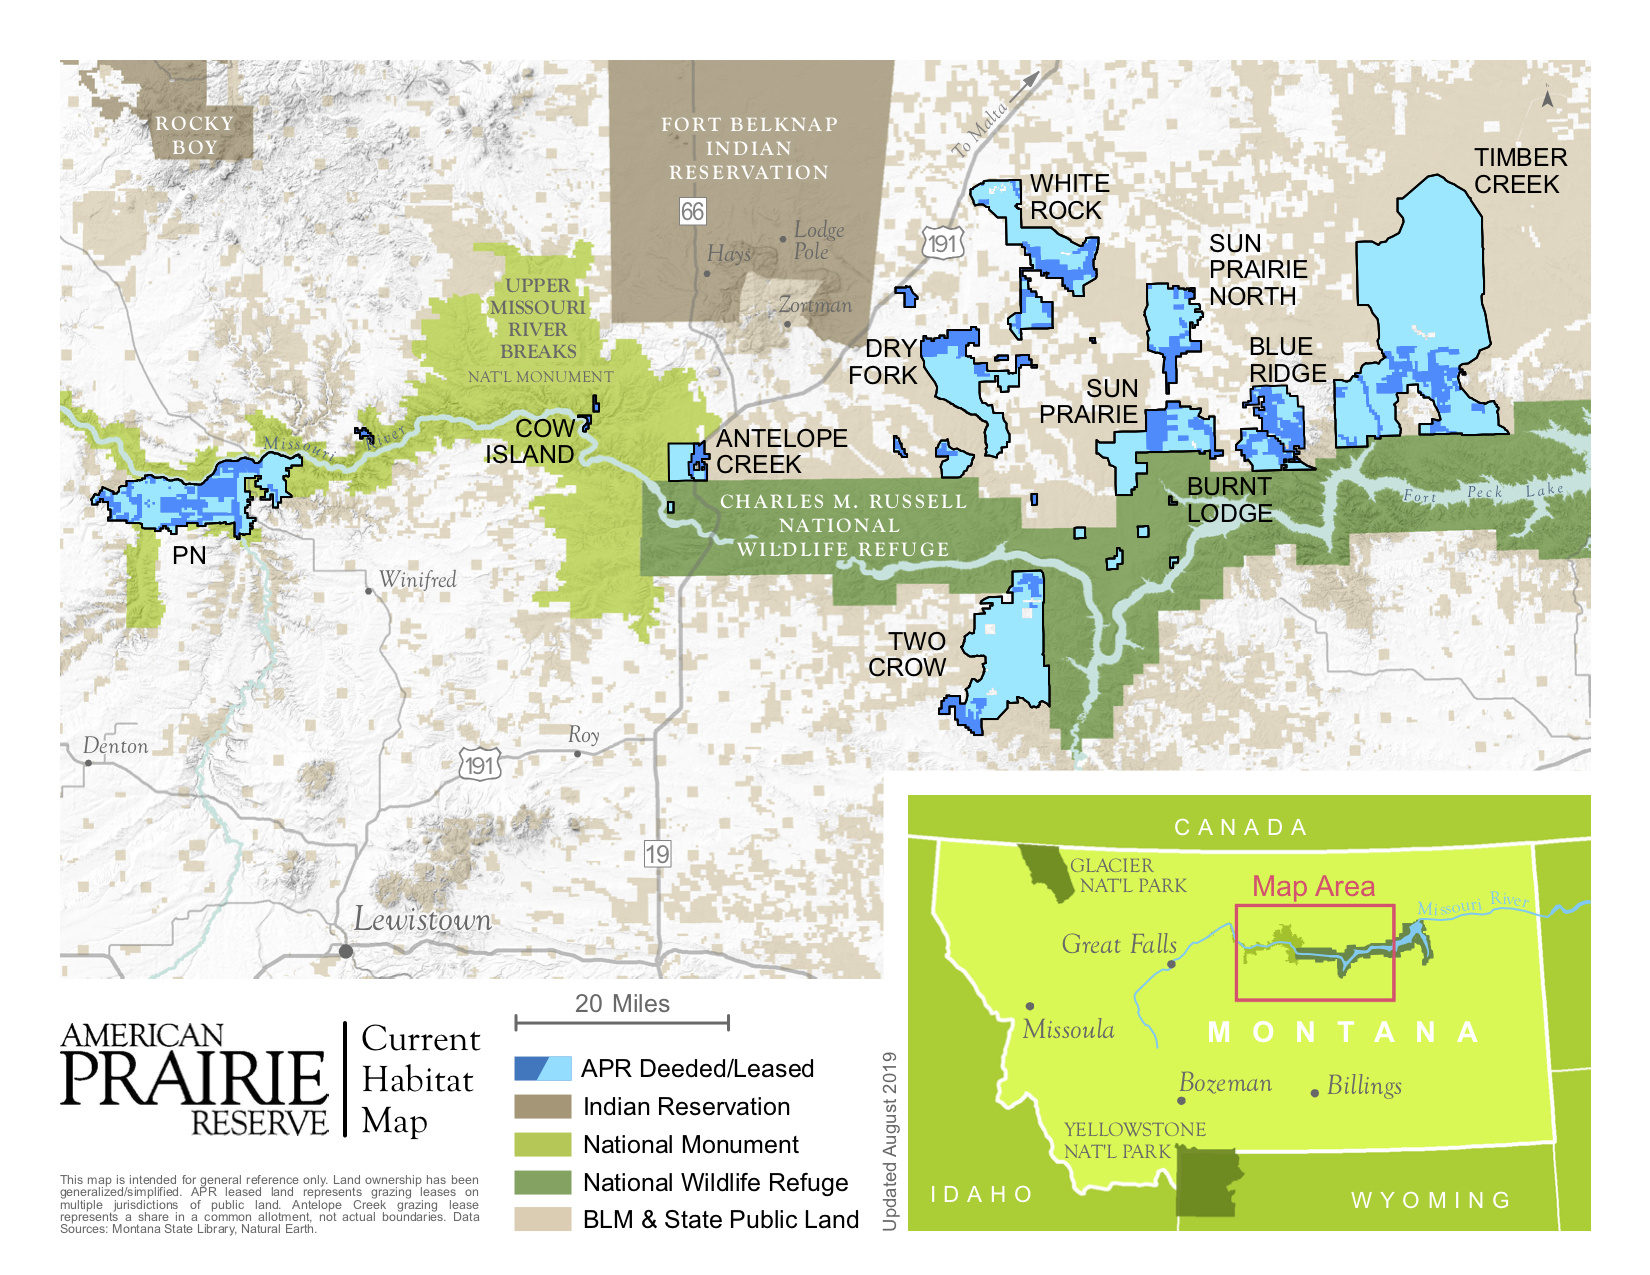 PICTURED: A map of the APR and its acquisitions. Blue Ridge Ranch, the latest purchase, can be seen on the right side of the map. Photo credit: American Prairie Reserve.